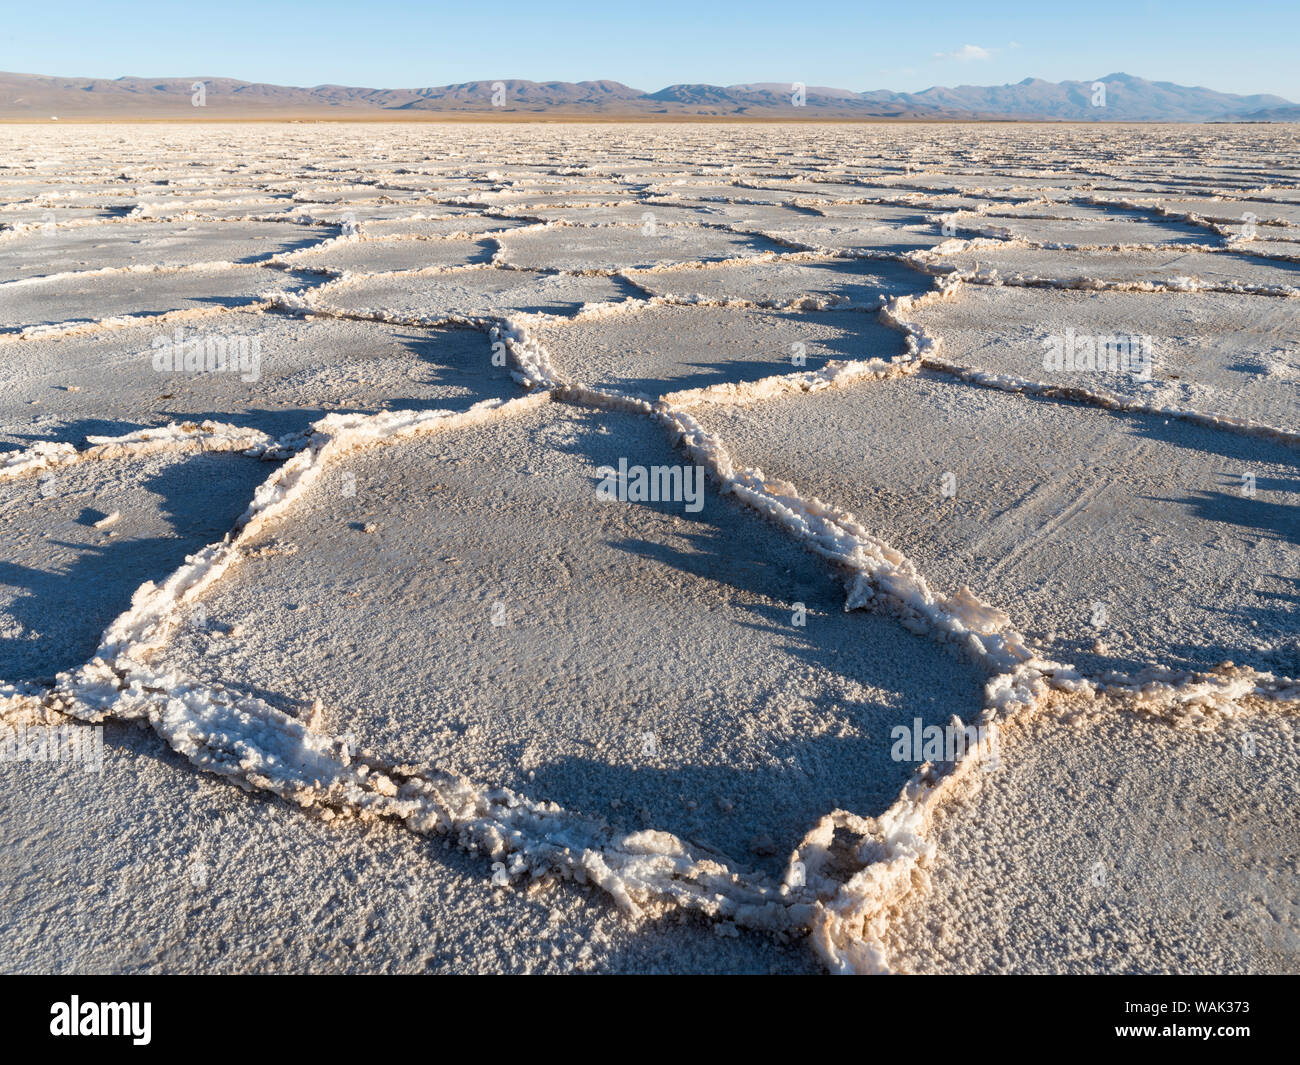 Surface of the Salar. Landscape on the salt flats Salar Salinas Grandes in the Altiplano, Argentina. Stock Photo